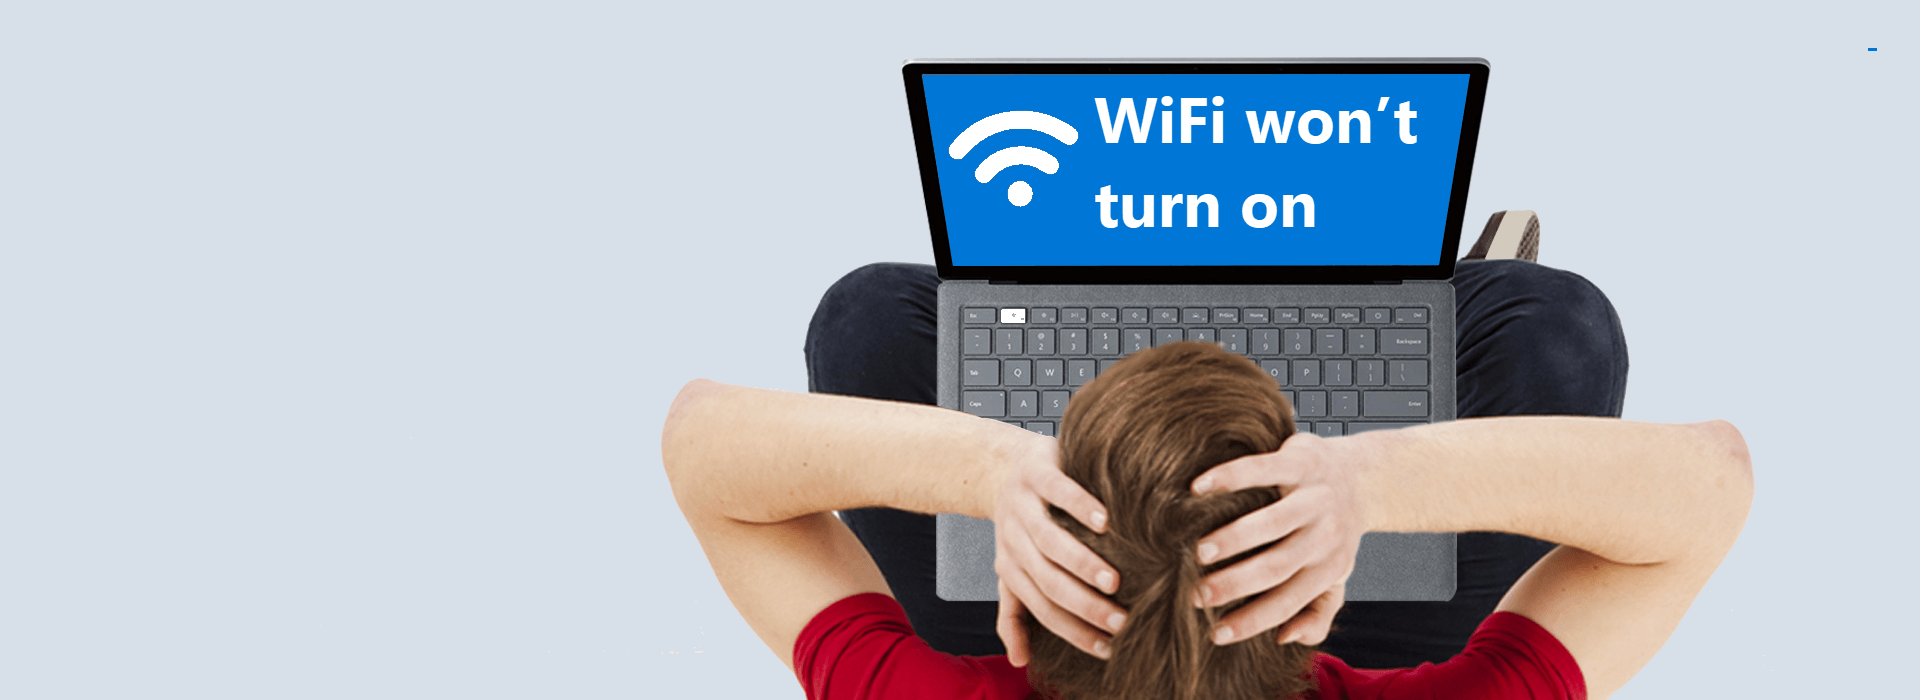 microsoft updates for windows 10 won connect to wifi